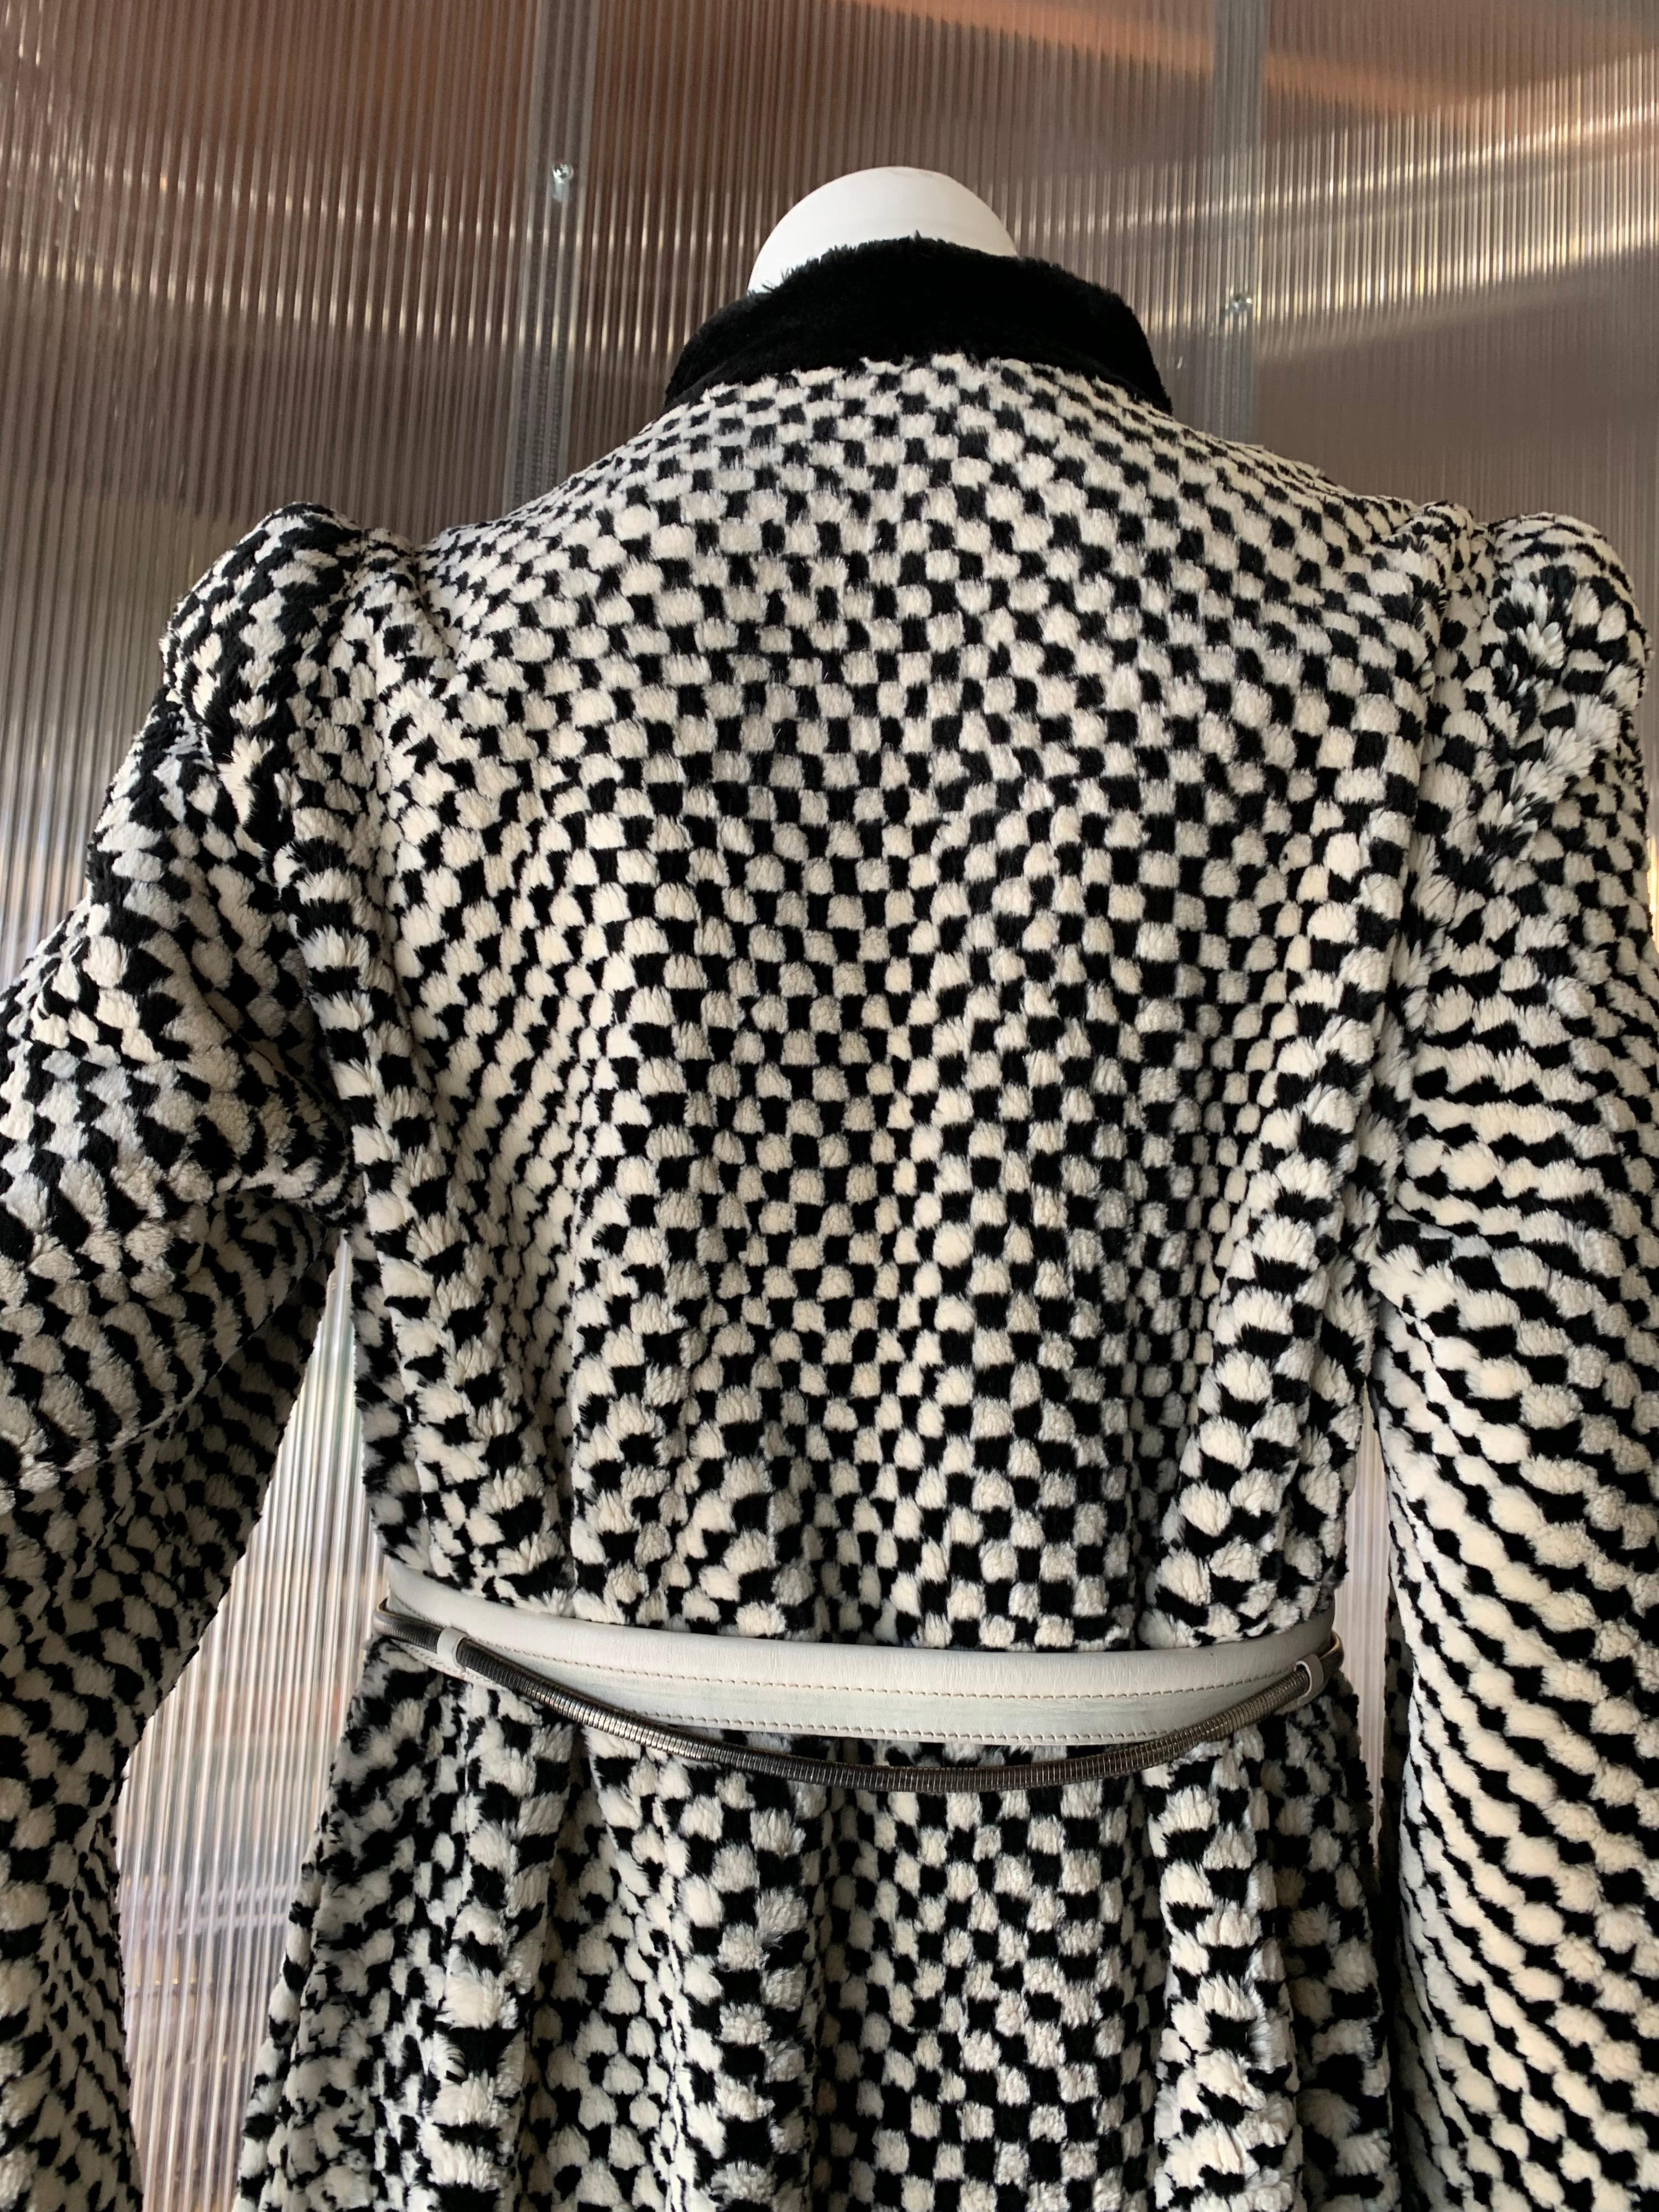 1980s Givenchy Couture Checkerboard Sheared Beaver Coat W/ Black Fur Front Trim In Good Condition For Sale In Gresham, OR